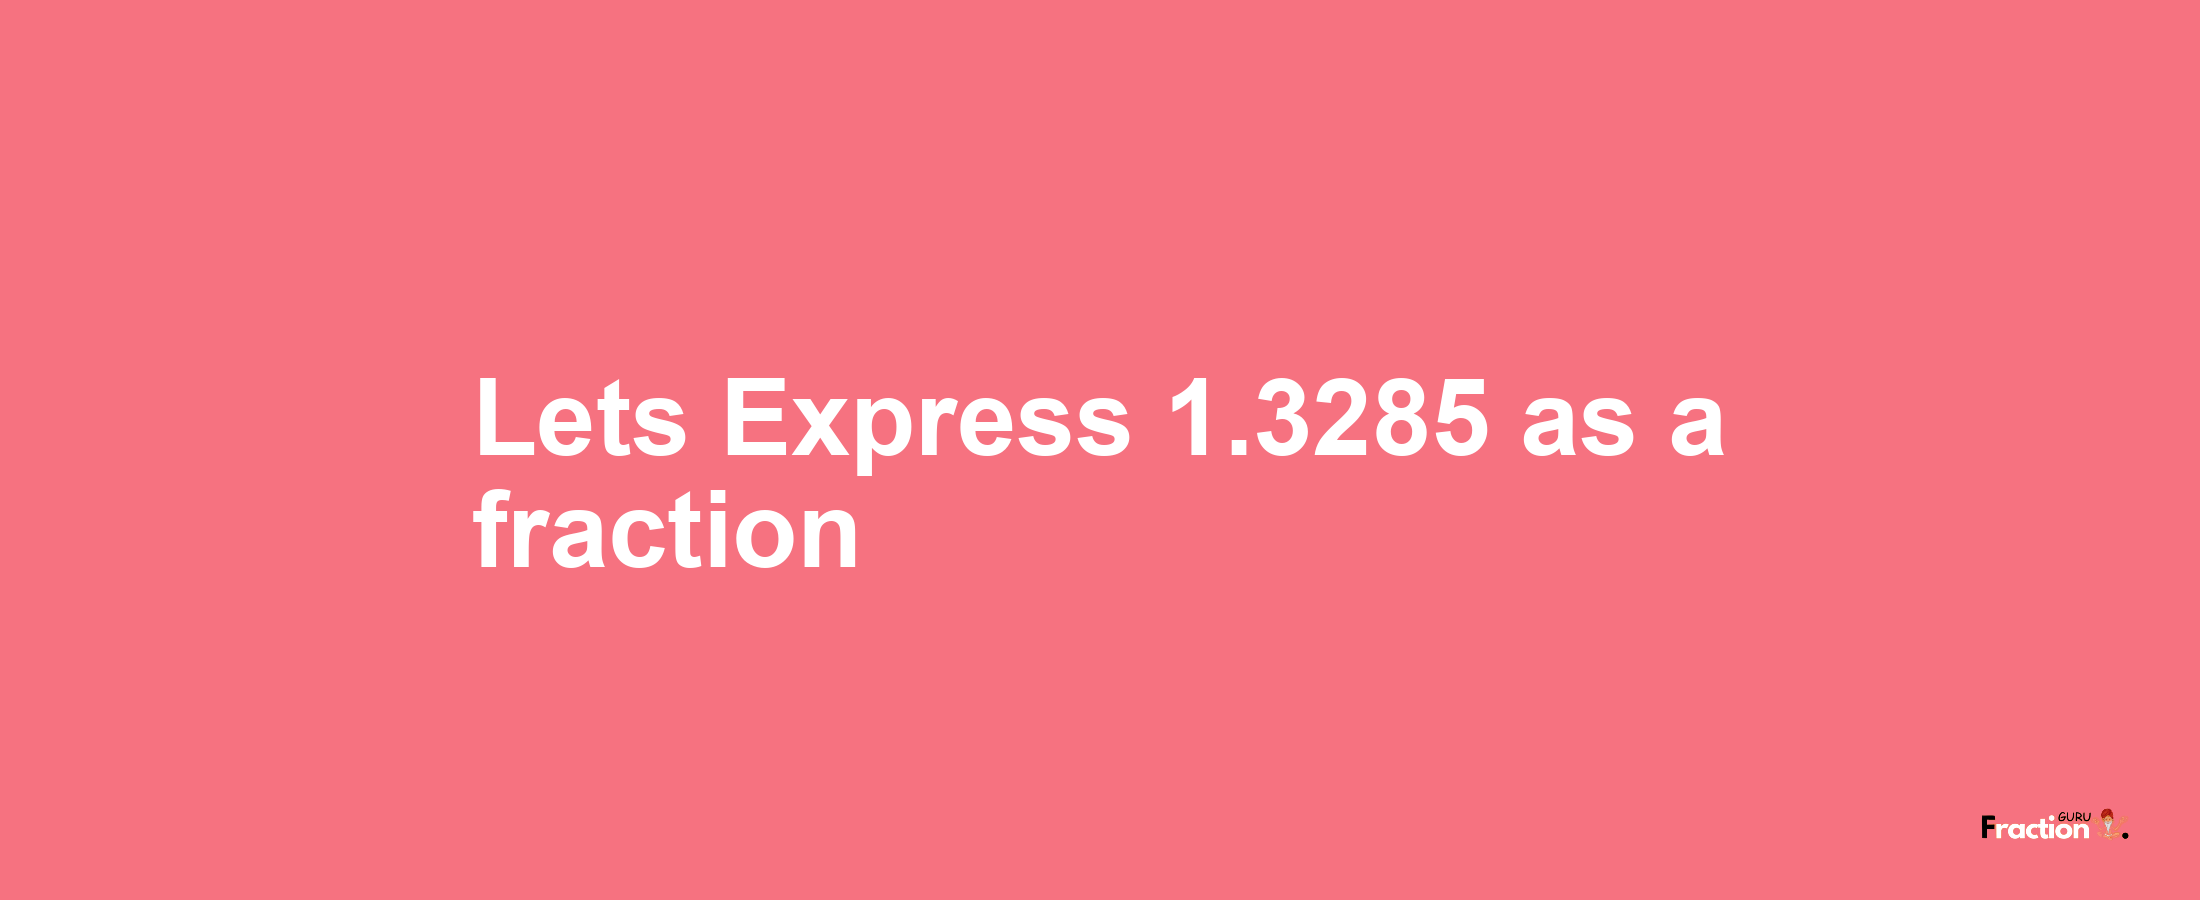 Lets Express 1.3285 as afraction